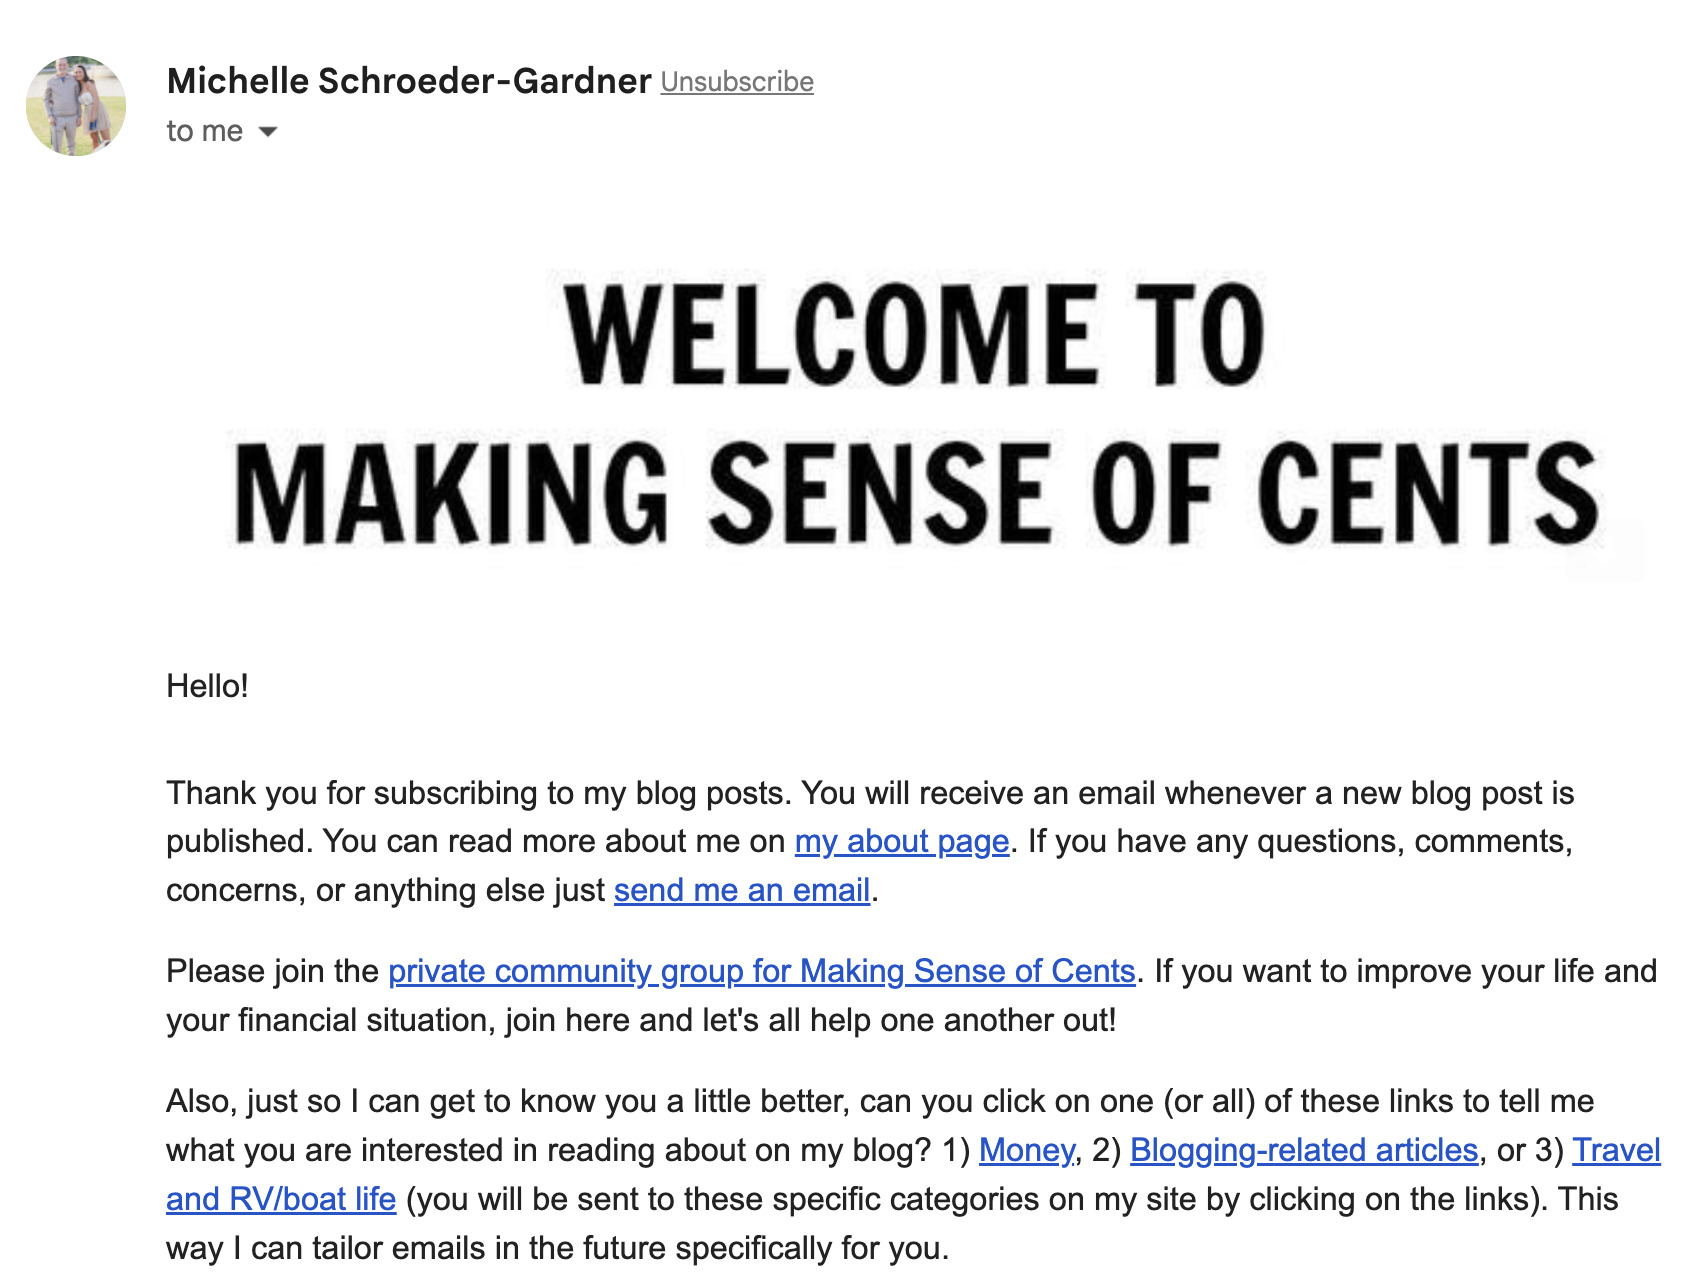 Making Sense of Cents' email newsletter